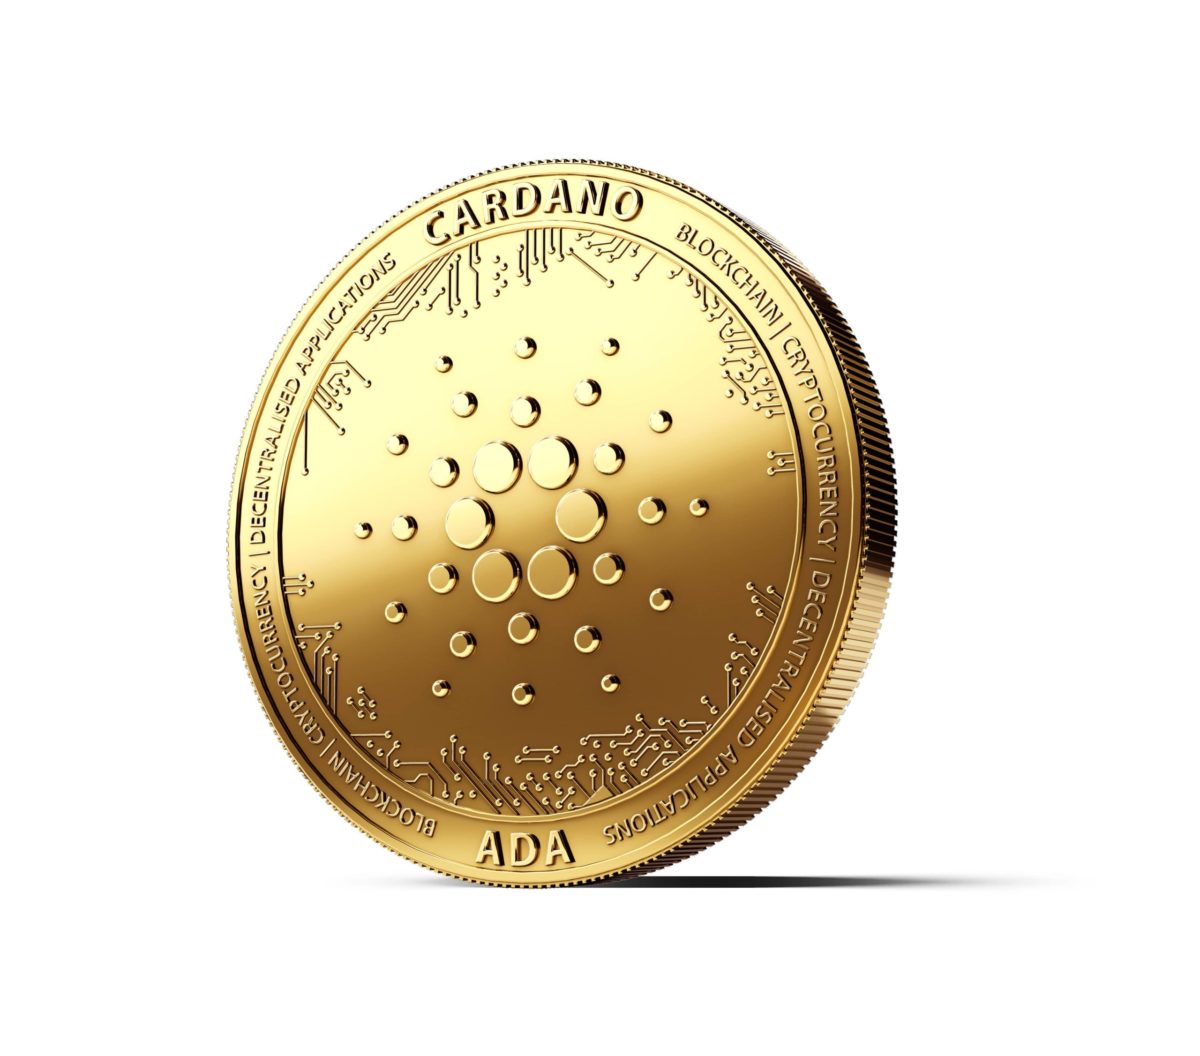 Cardano (ADA) and its importance